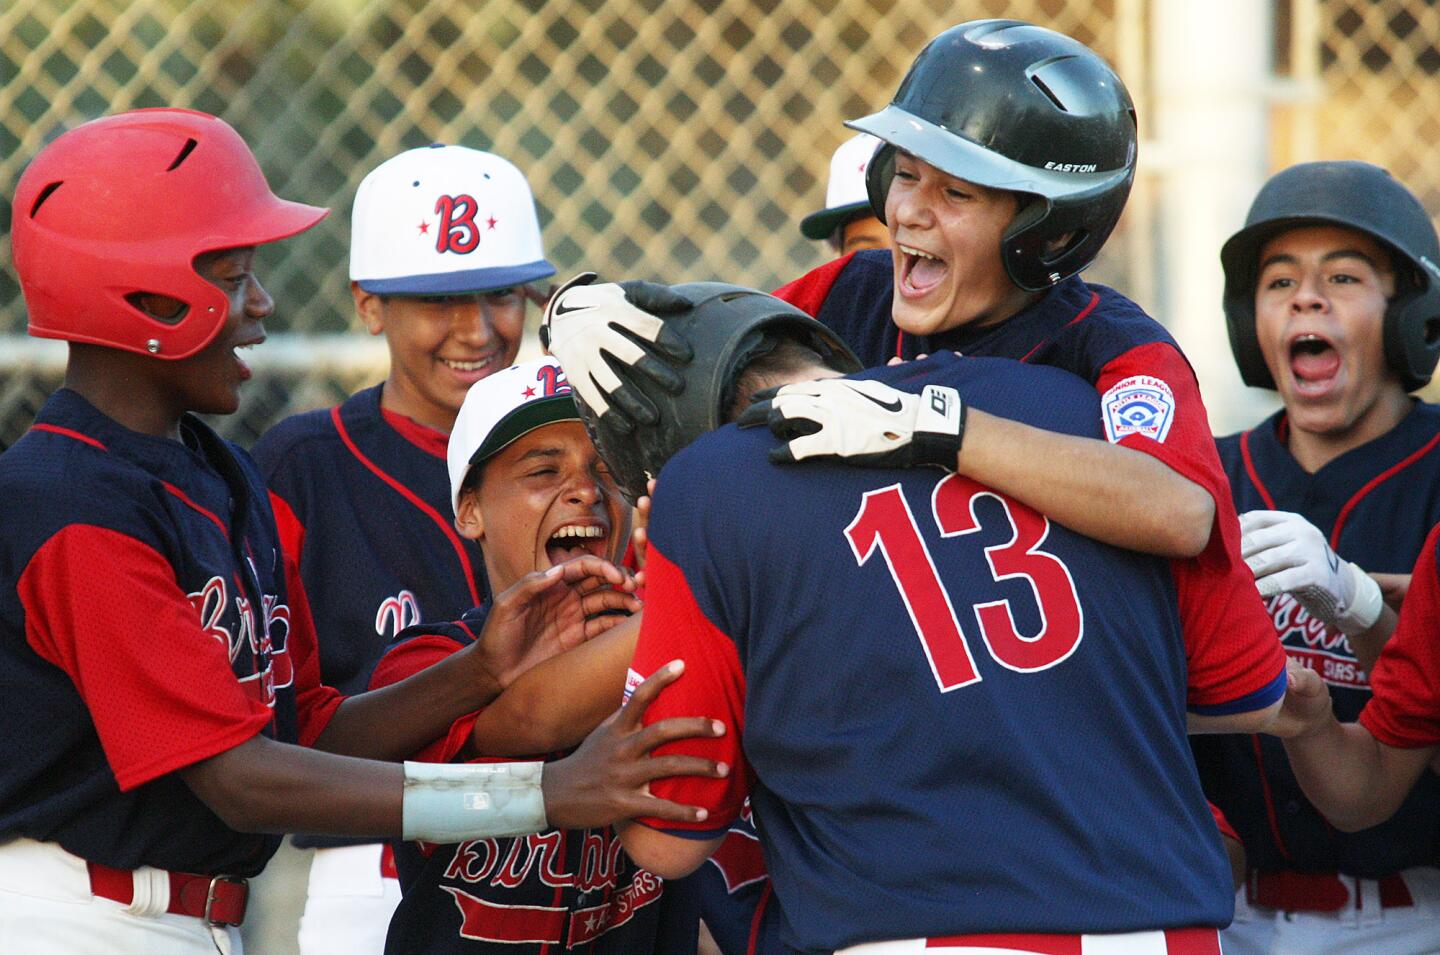 Burbank's Scott Breslin (13) is exhuberantly congratulated at homeplate after hitting a two-run homerun against Crescenta Valley in a Little League Junior Baseball all-star game at Scholl Canyon Fields on Monday, July 7, 2014.